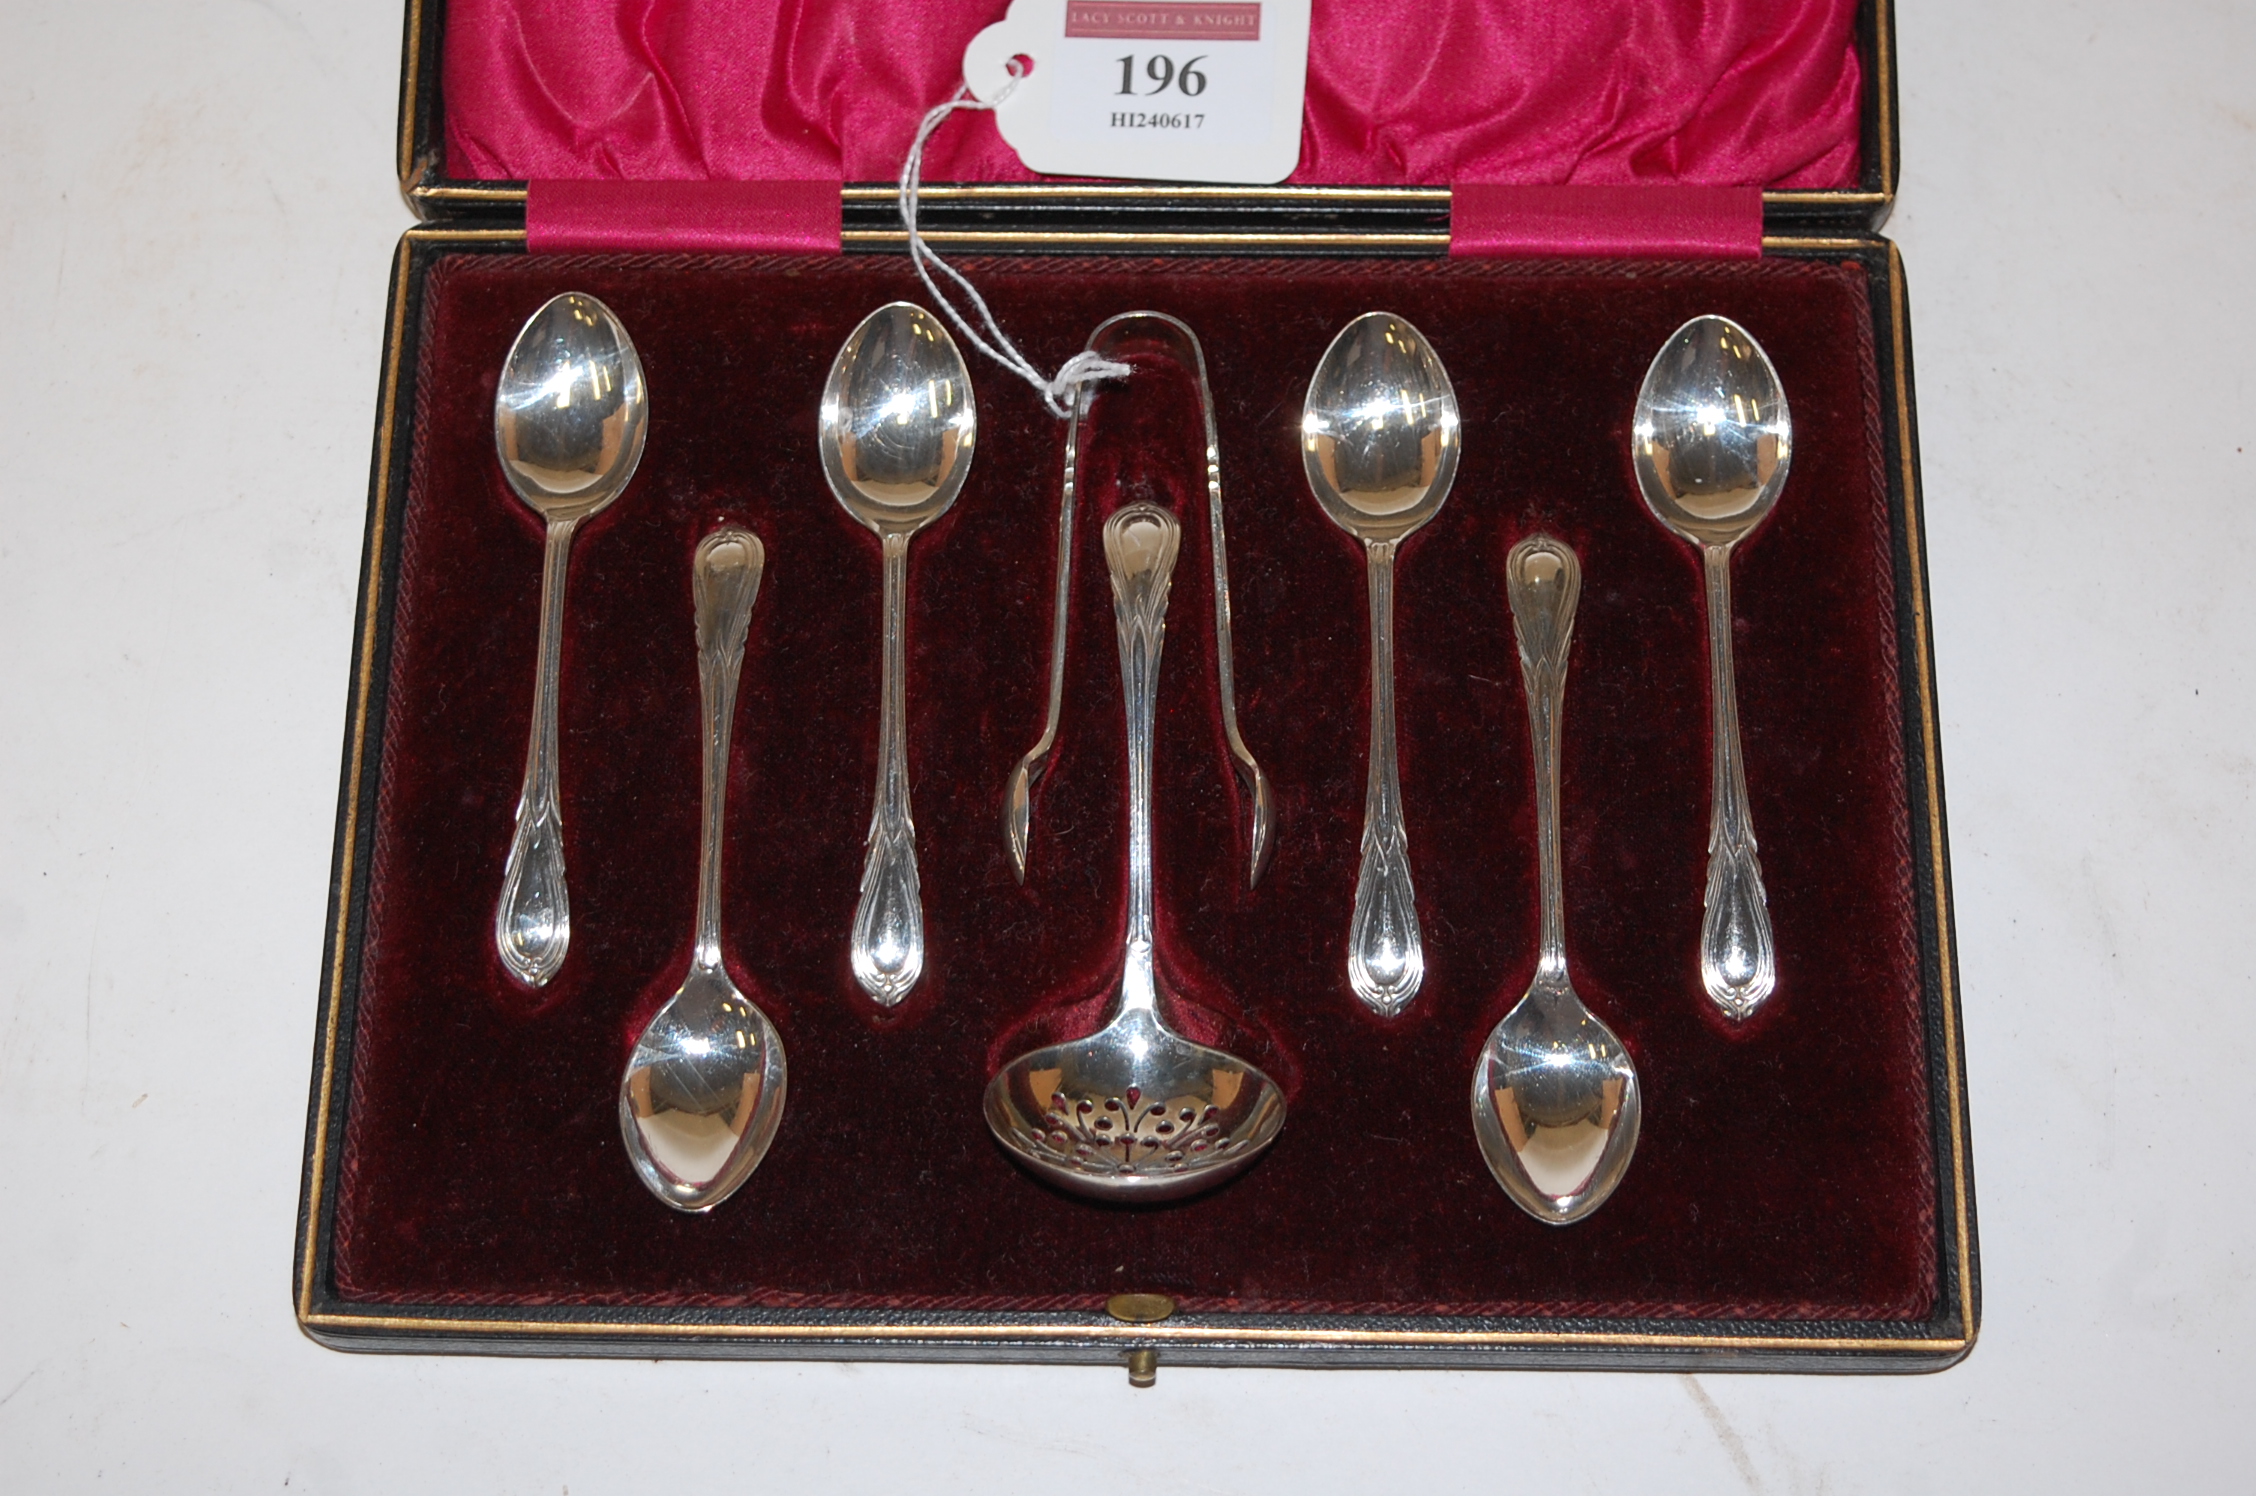 A cased set of six Edwardian silver teaspoons with matching sifting spoon and sugar bows by John